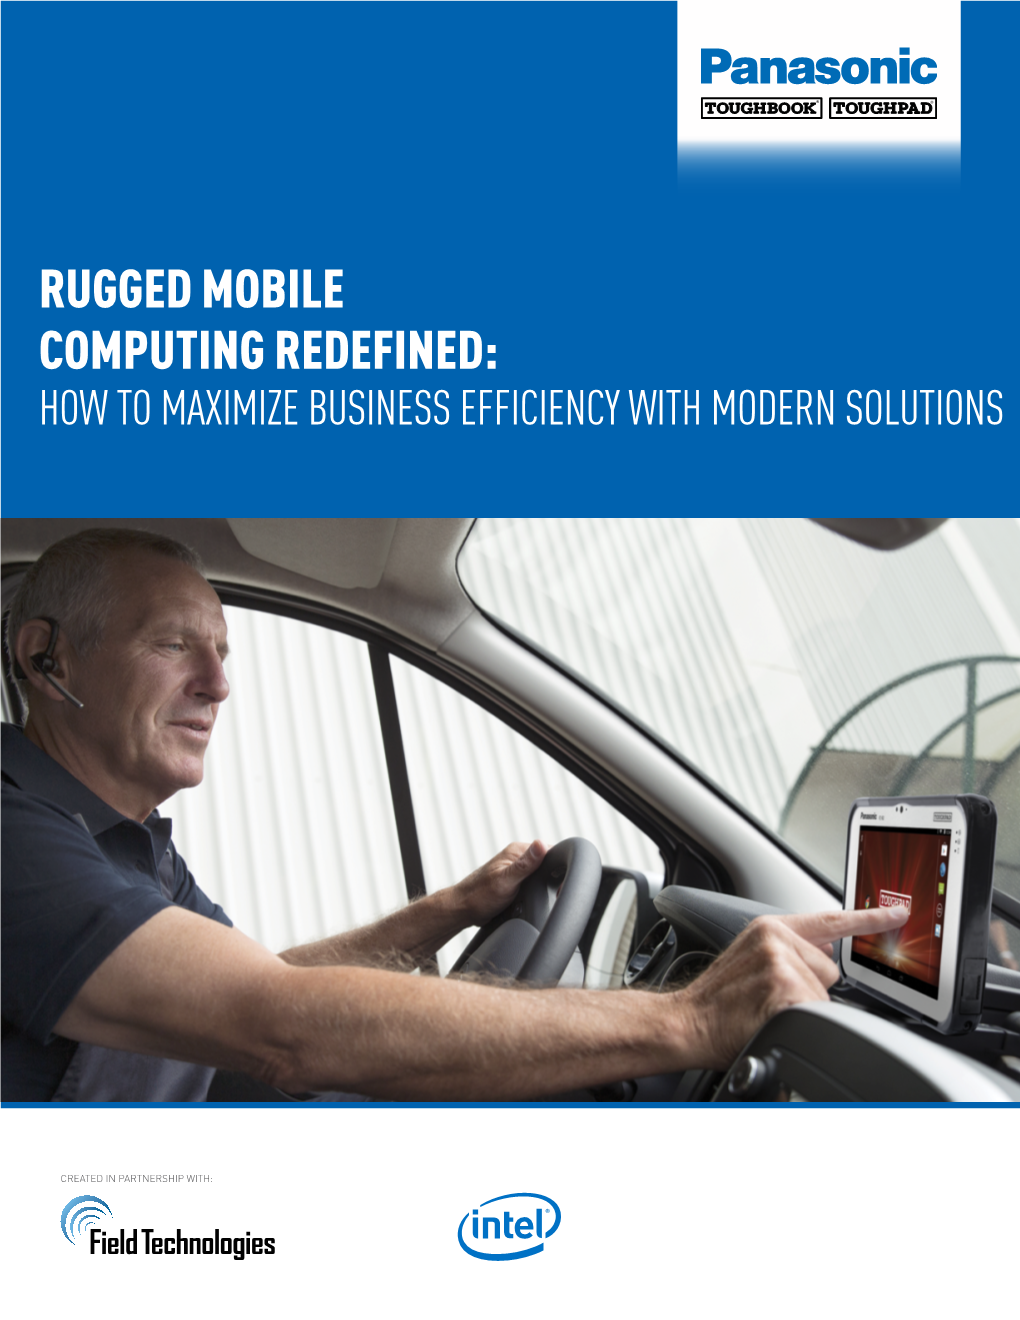 Rugged Mobile Computing Redefined: How to Maximize Business Efficiency with Modern Solutions